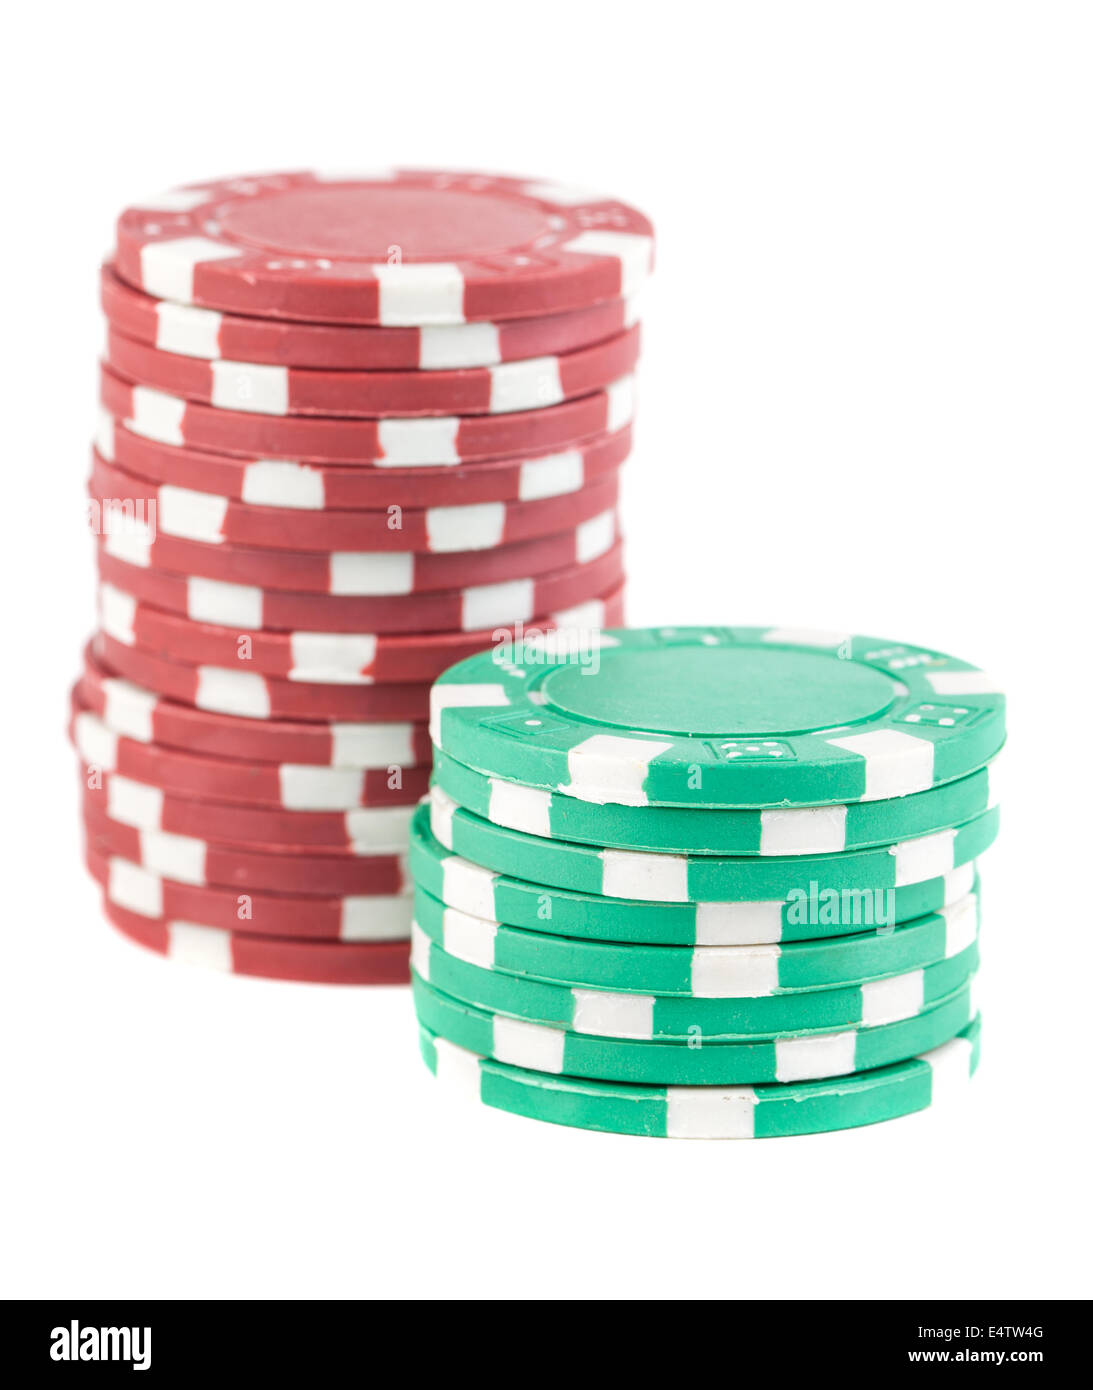 Stacks of red and green poker chips Stock Photo